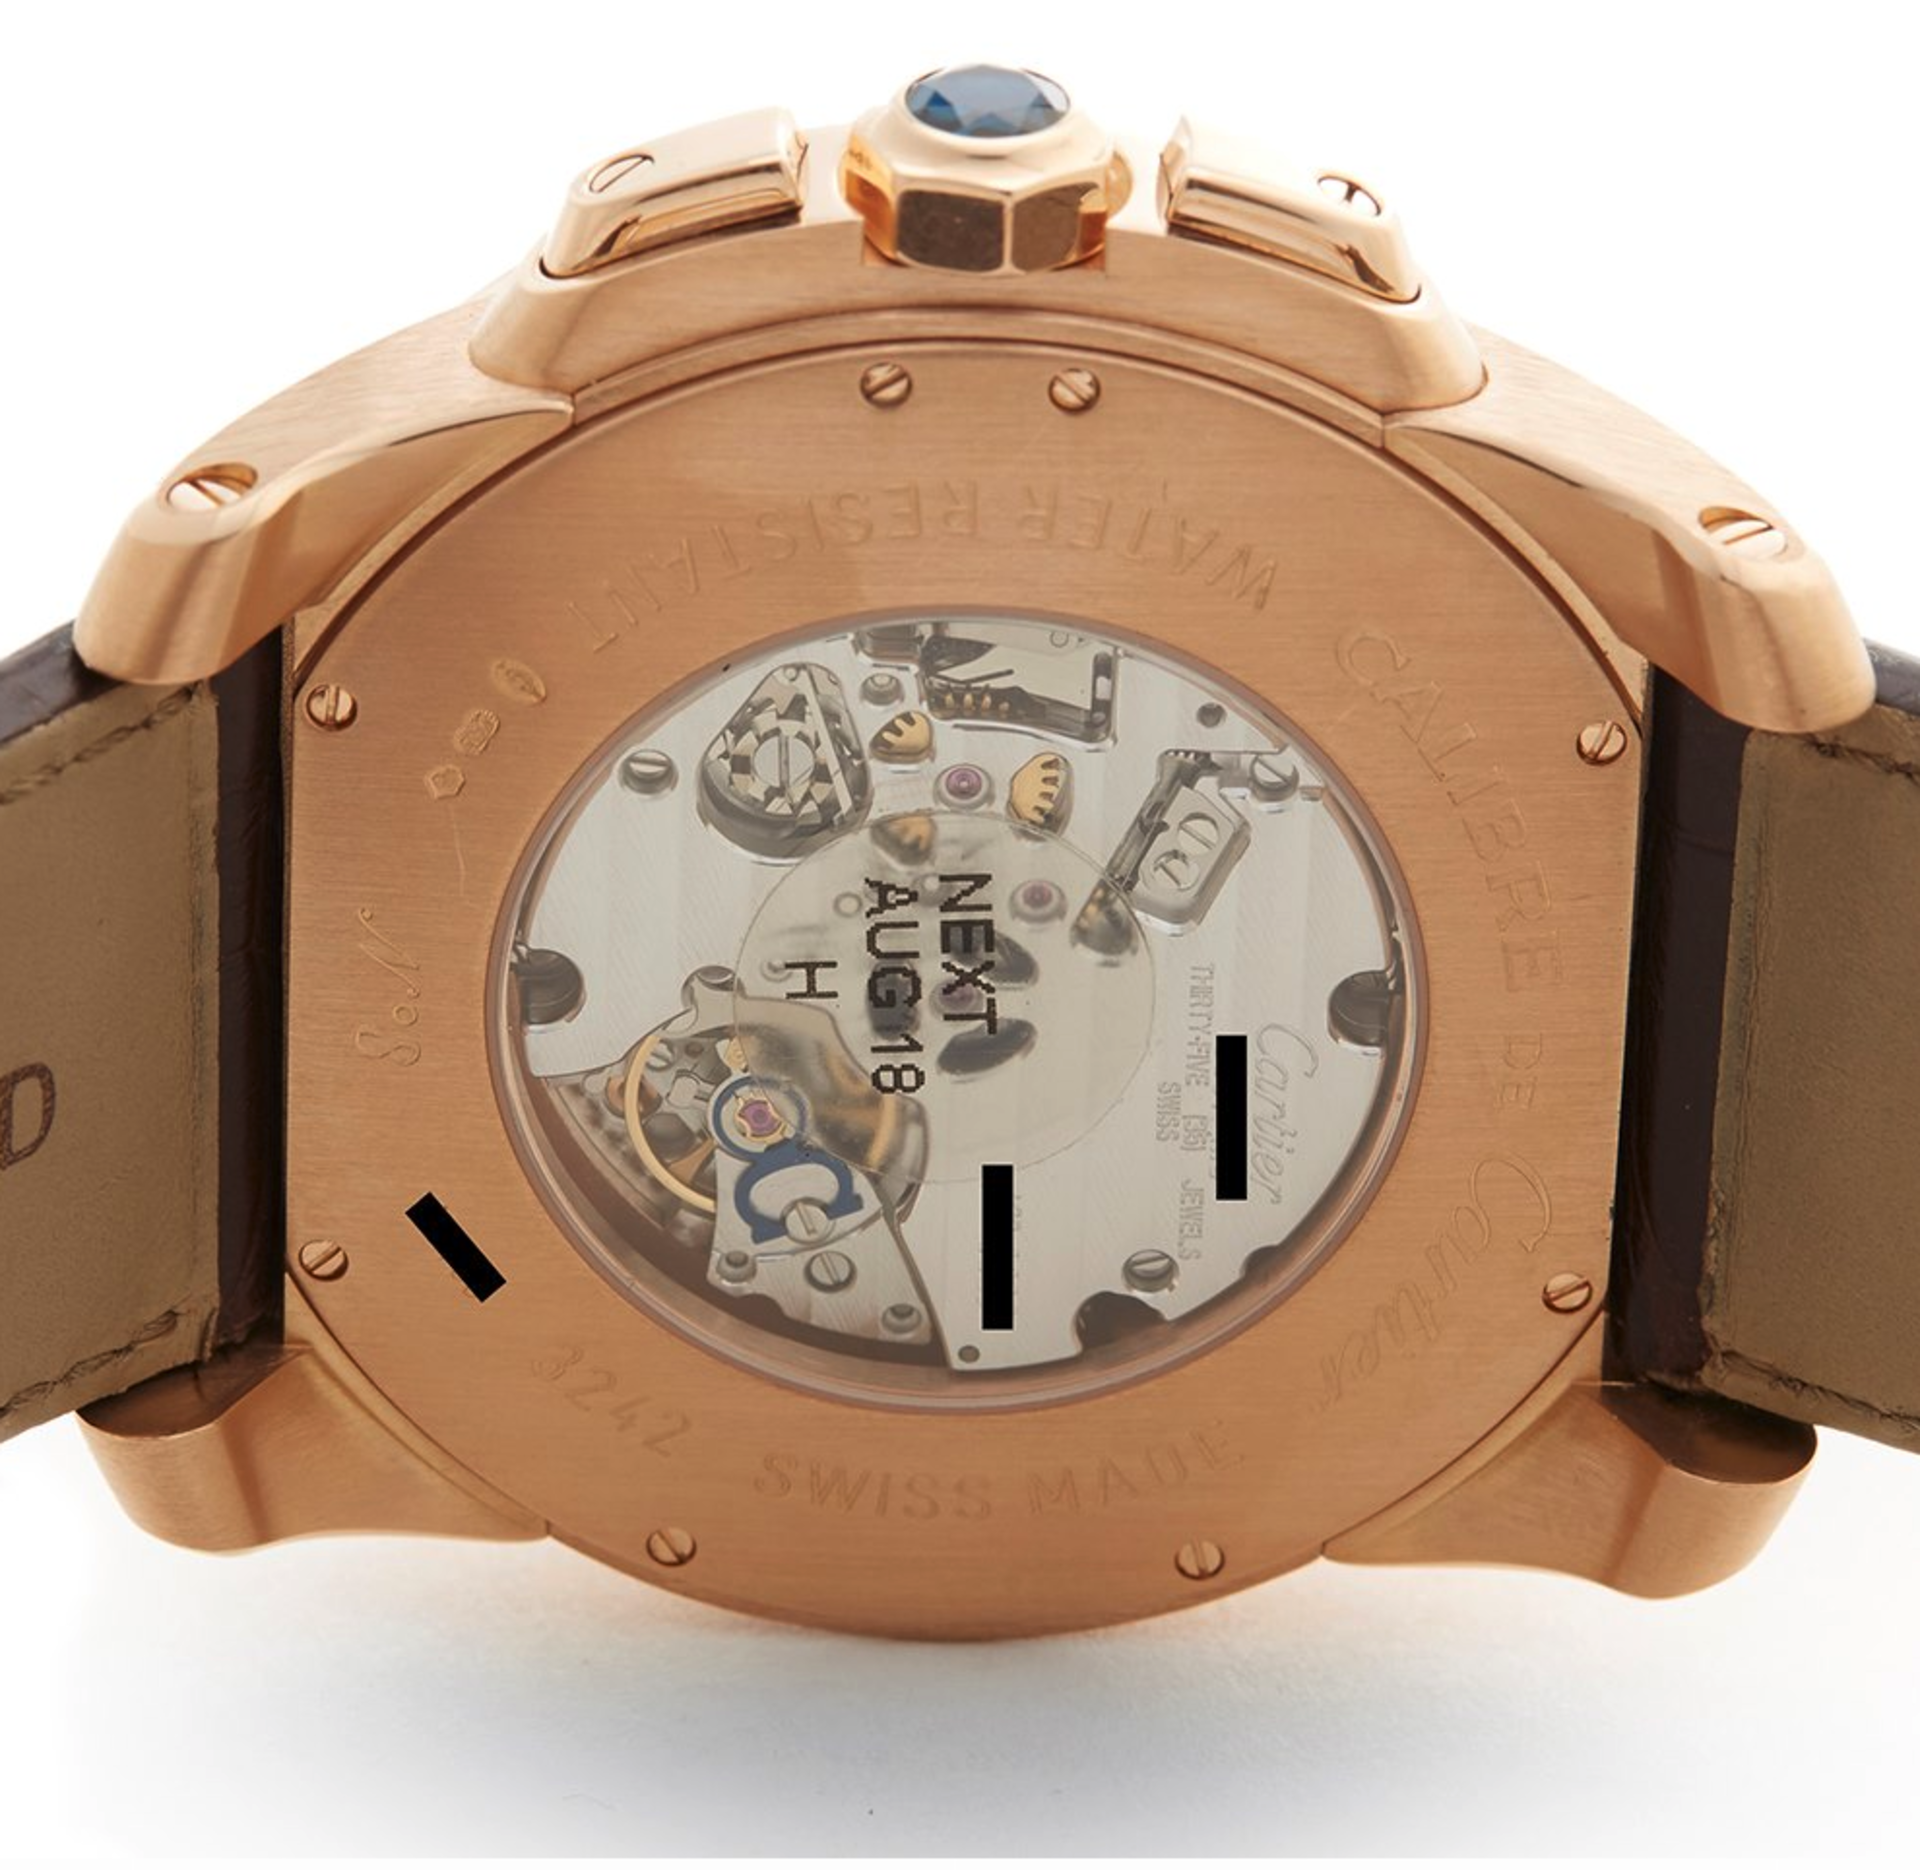 Cartier Calibre Central Chronograph 44mm 18K Rose Gold - 3242 or W7100004 - Image 6 of 9